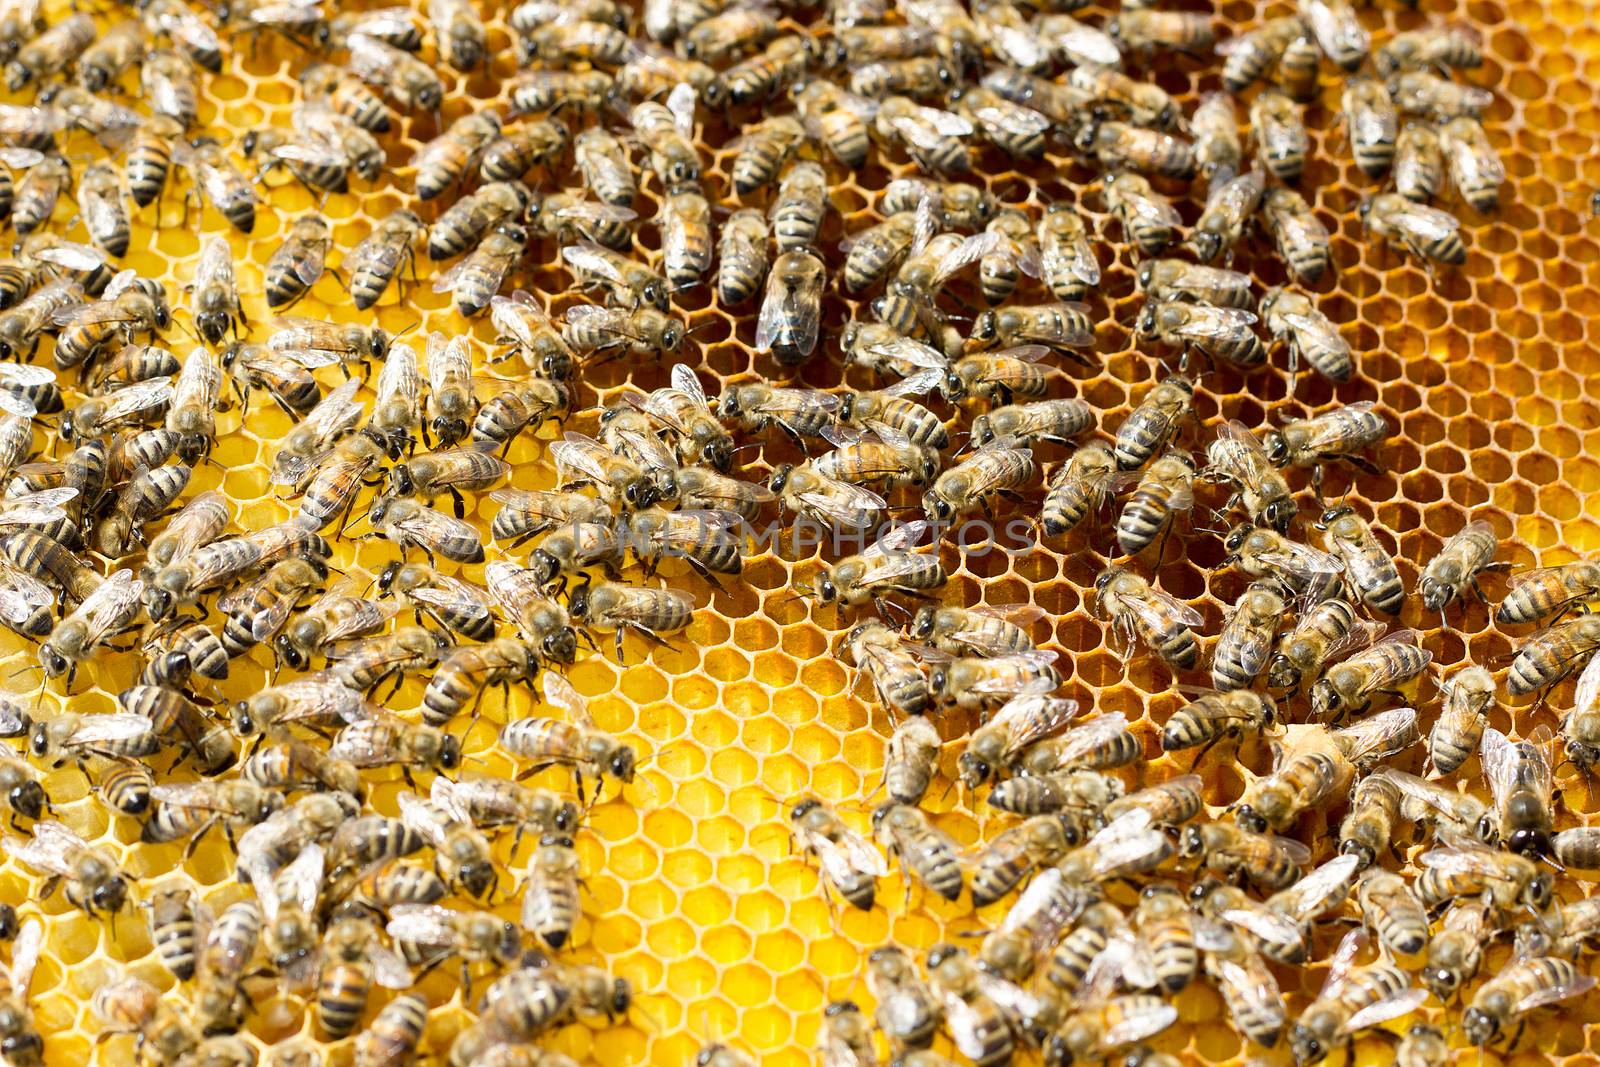 Bees on honeycomb. Closeup of bees on the honeycomb in beehive.